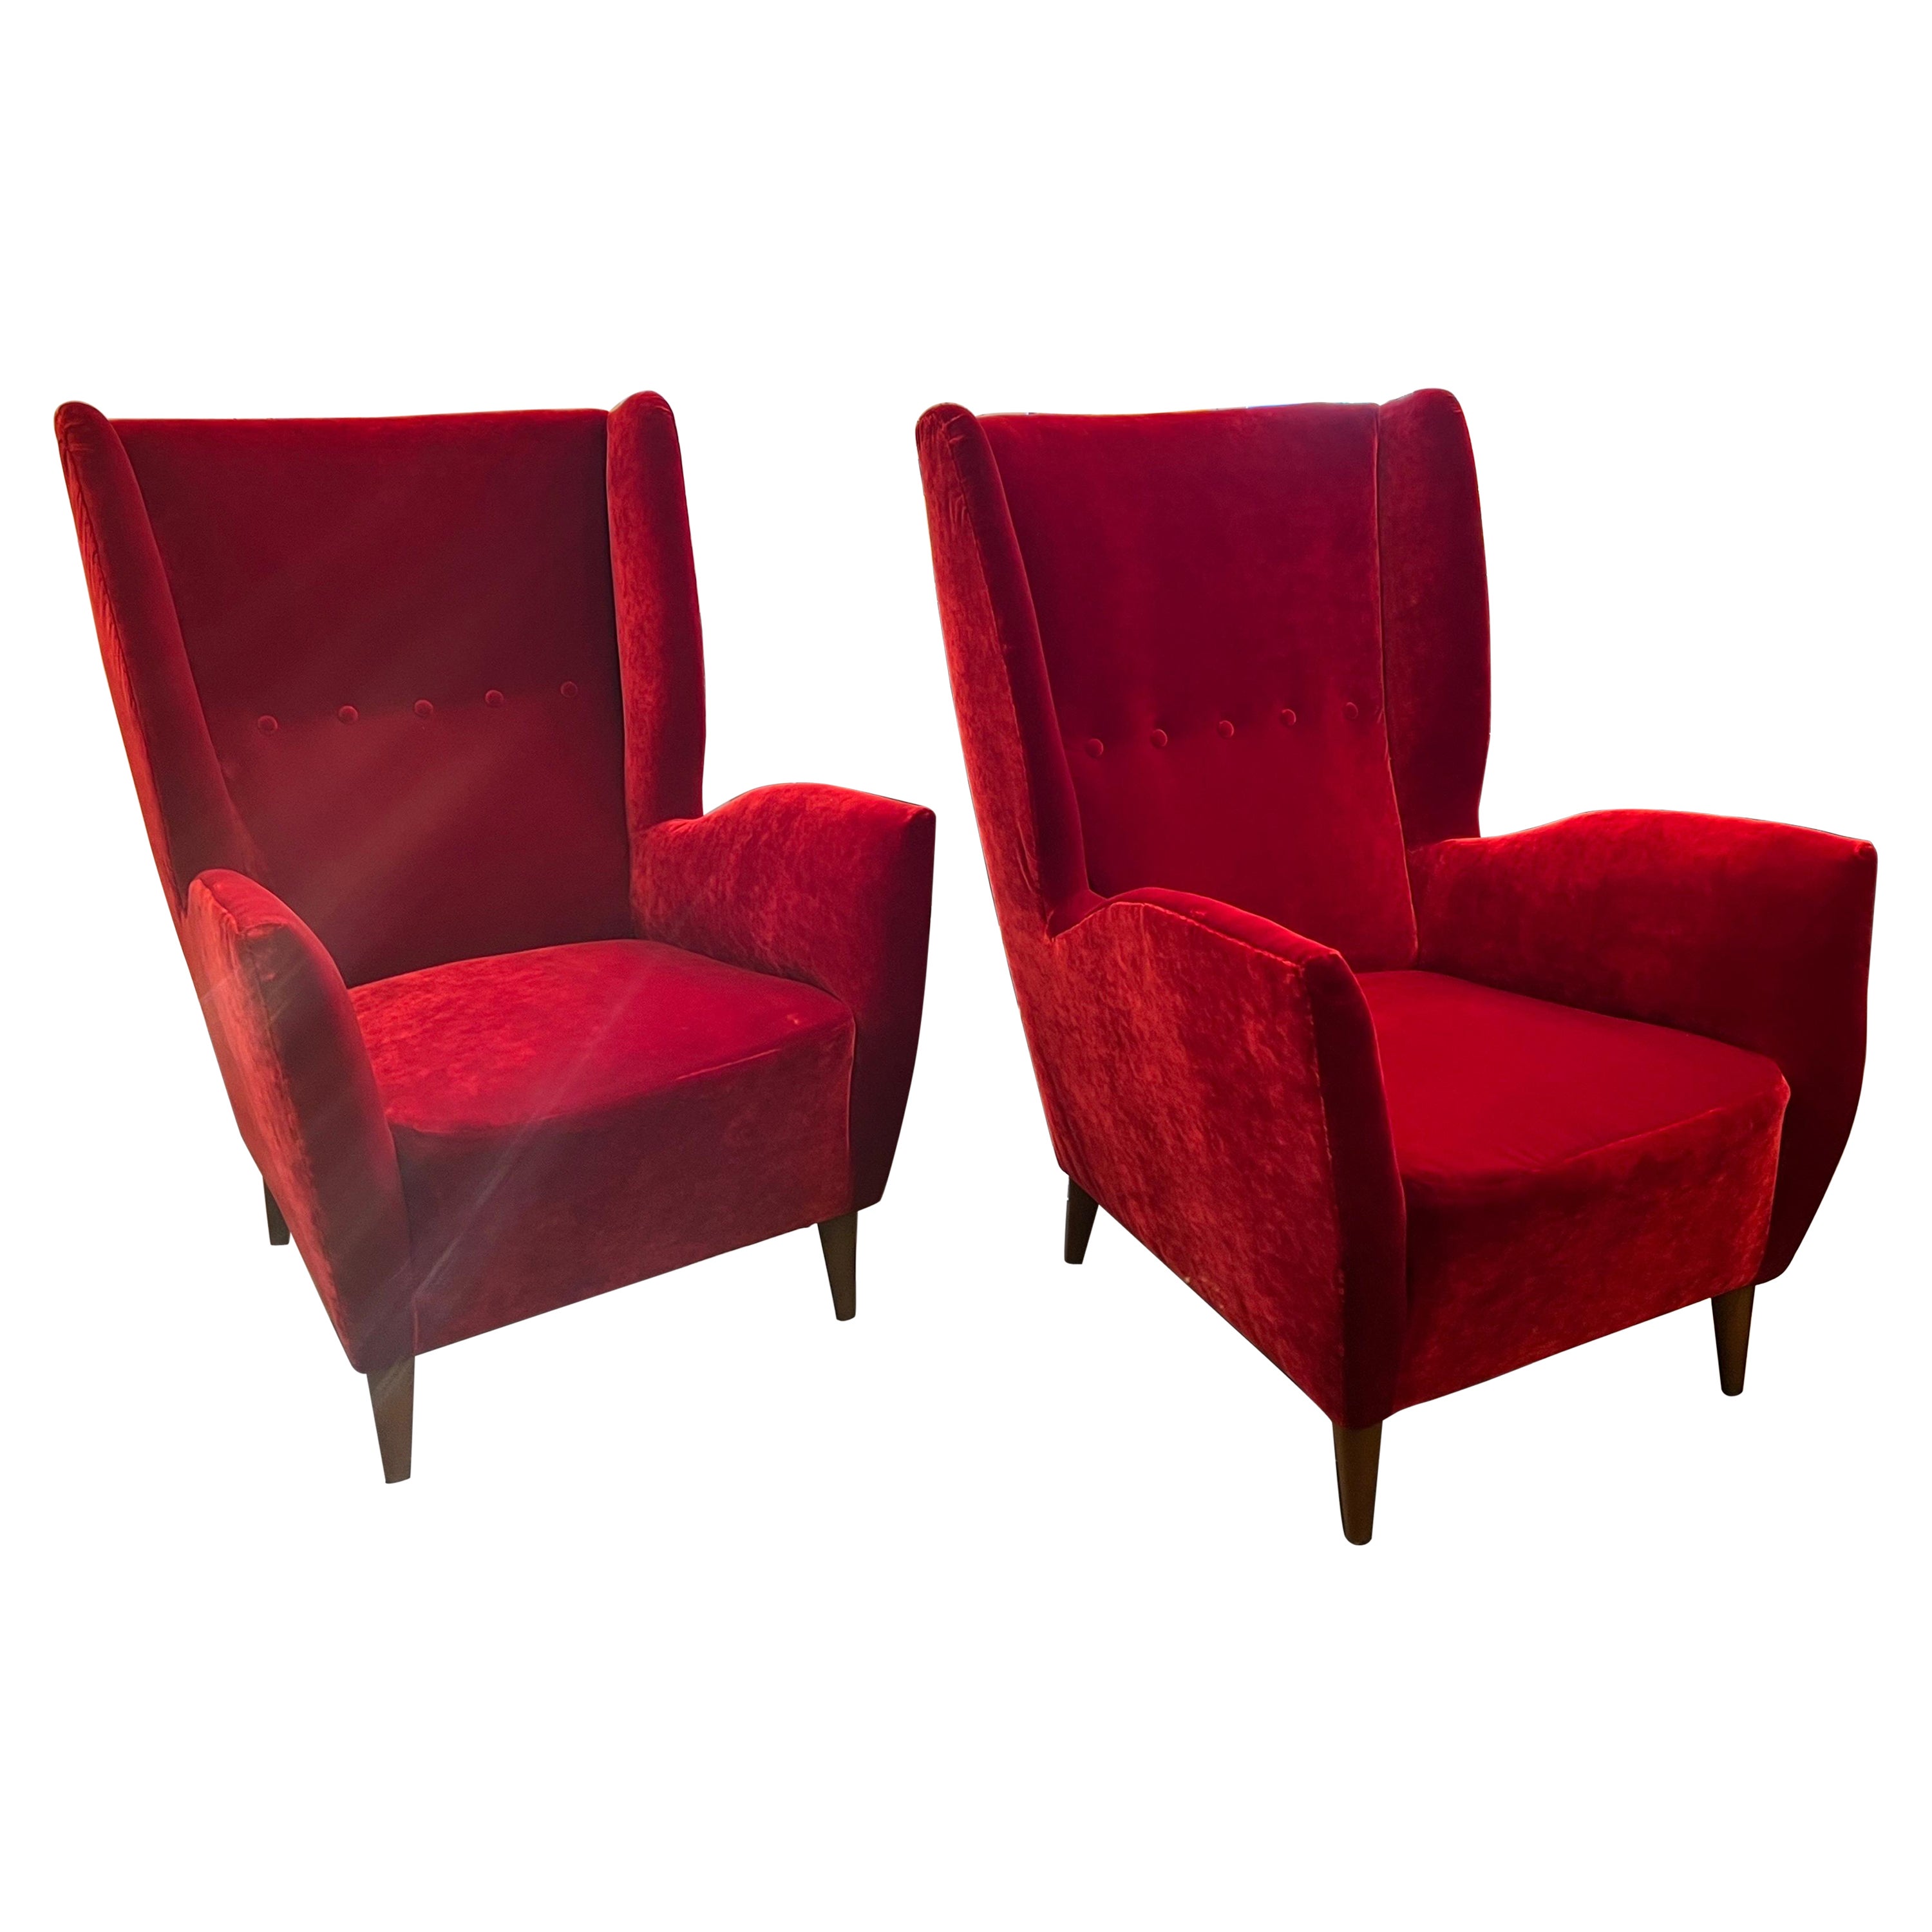 Pair Gio Ponti wingback armchairs in Venetian red velvet  For Sale